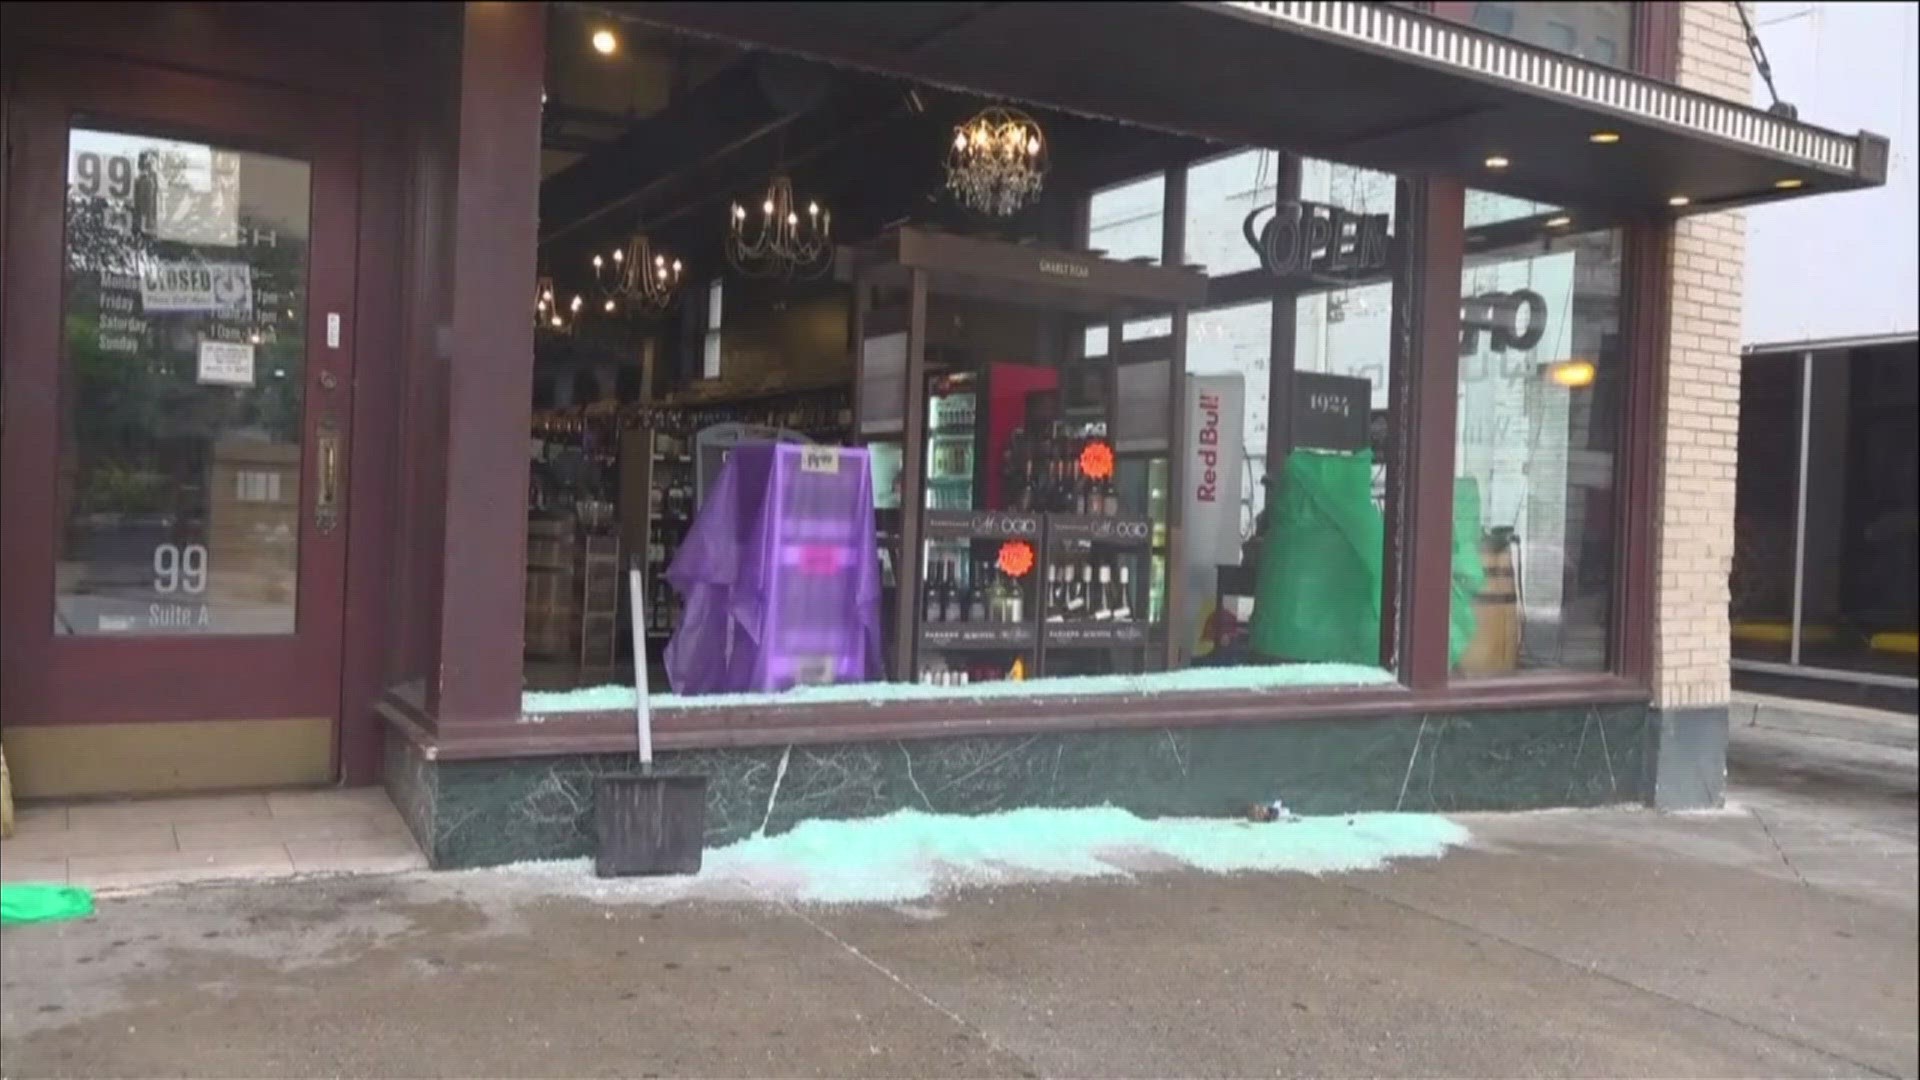 MPD said when officers arrived at the liquor store, the store's front glass window was shattered, and bottles of liquor were scattered up and down the sidewalk.